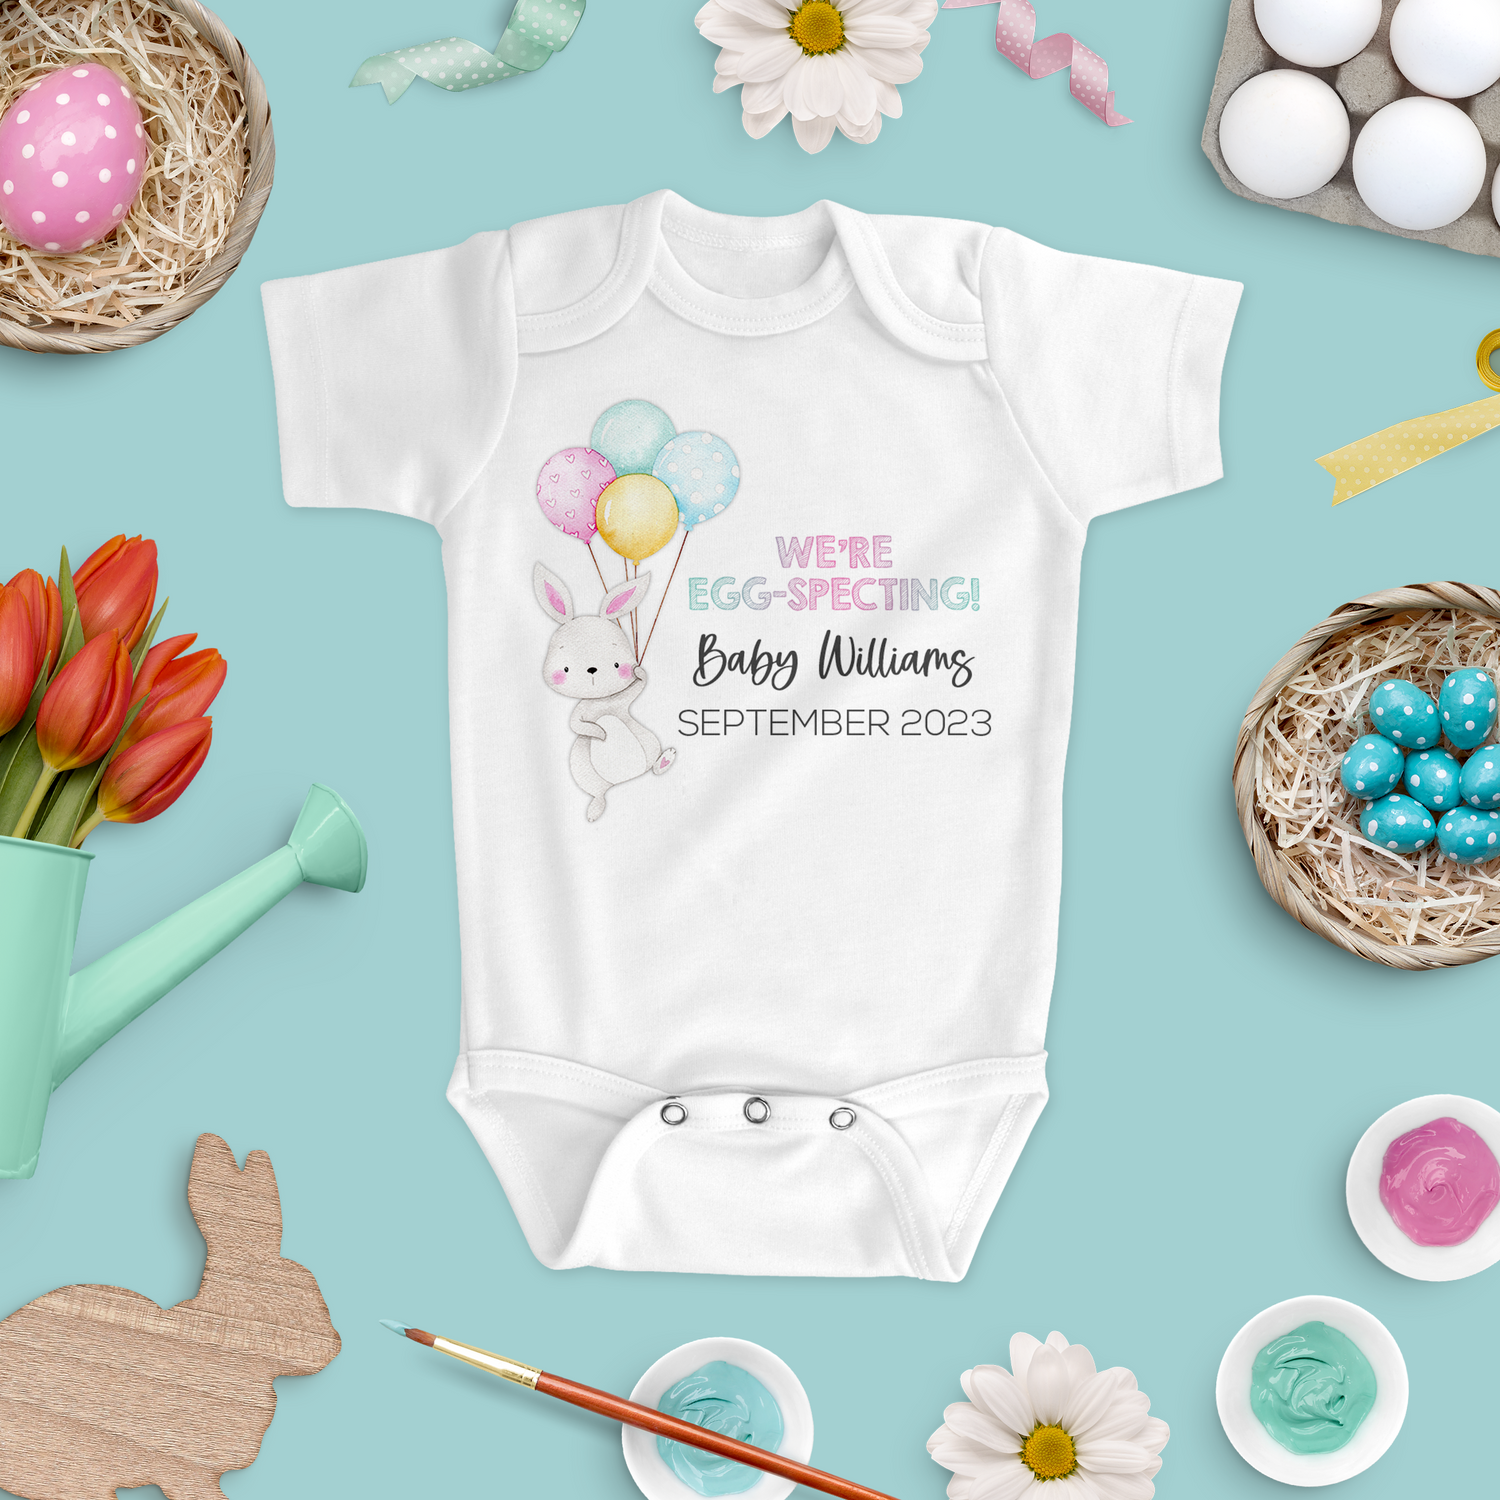 Easter-Themed Pregnancy Announcement Baby Bodysuits